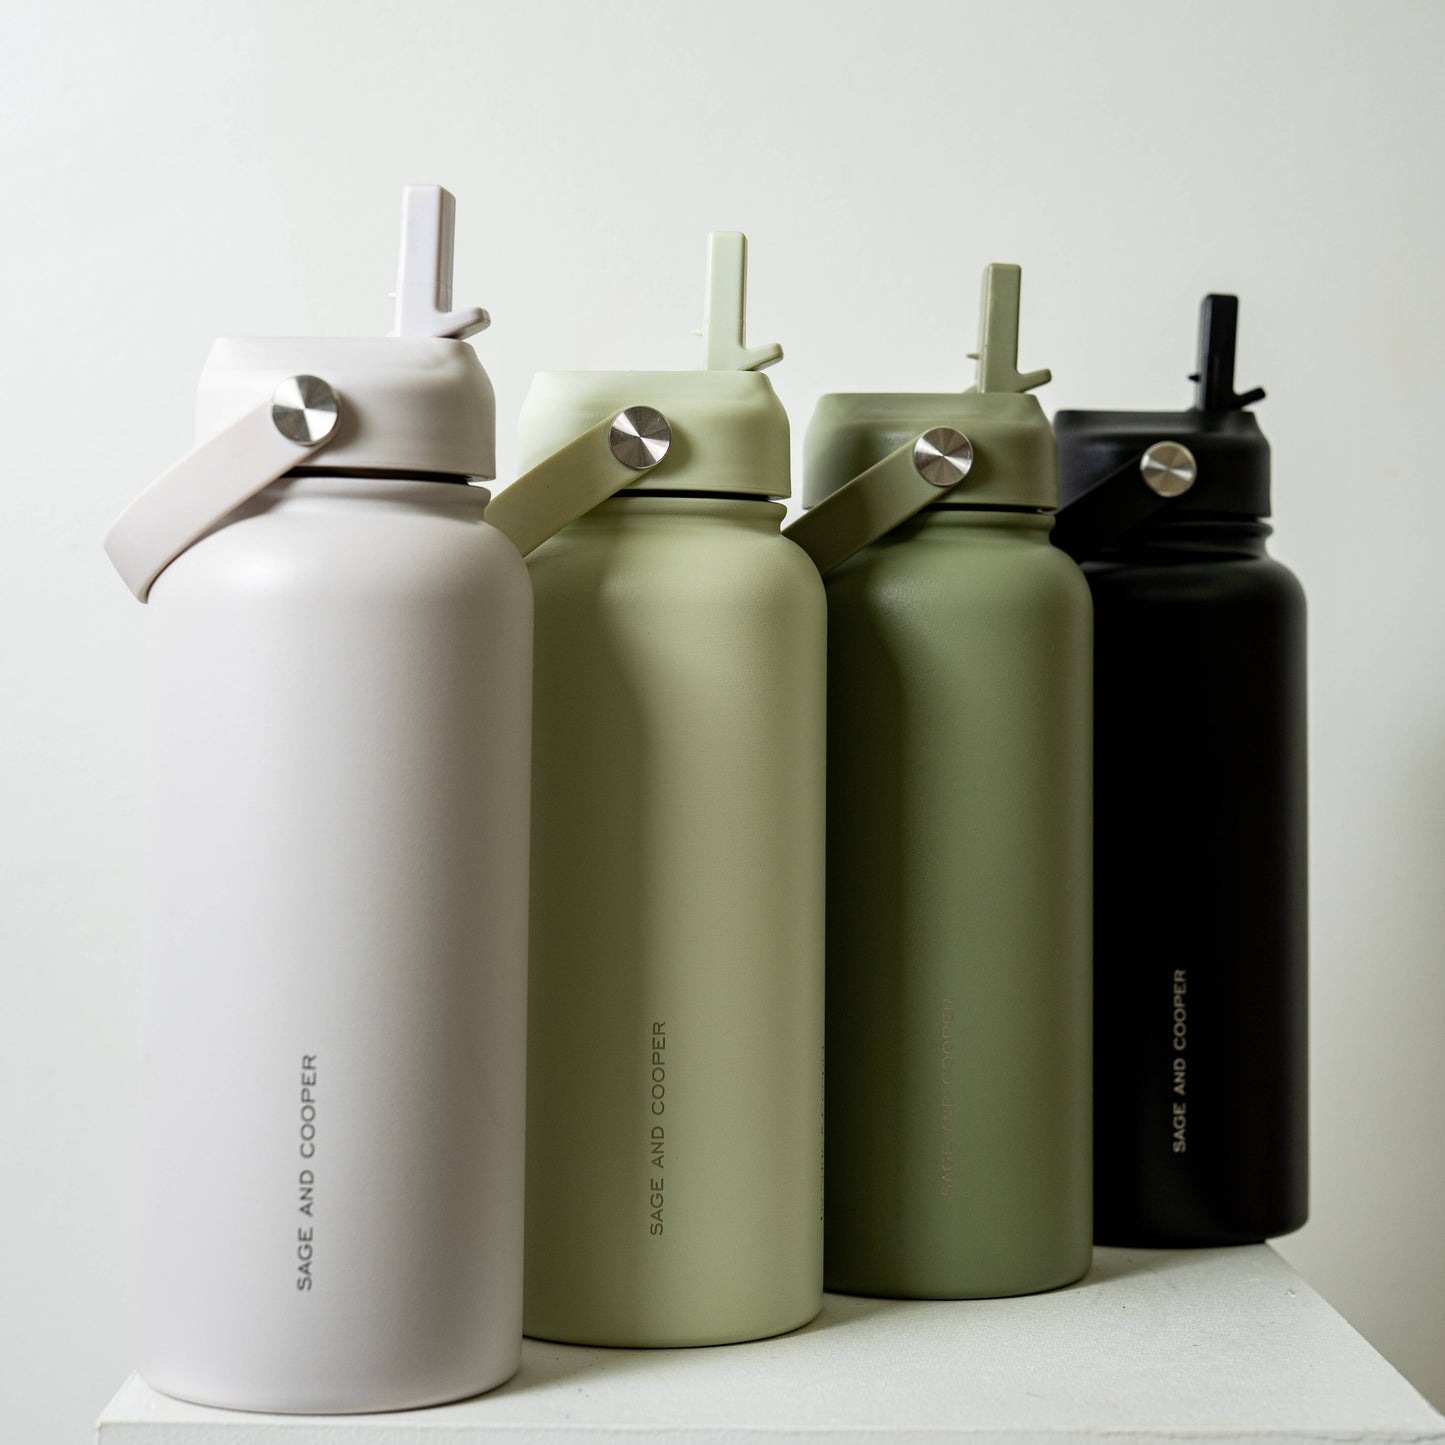 The Sage & Cooper Insulated Drink Bottle